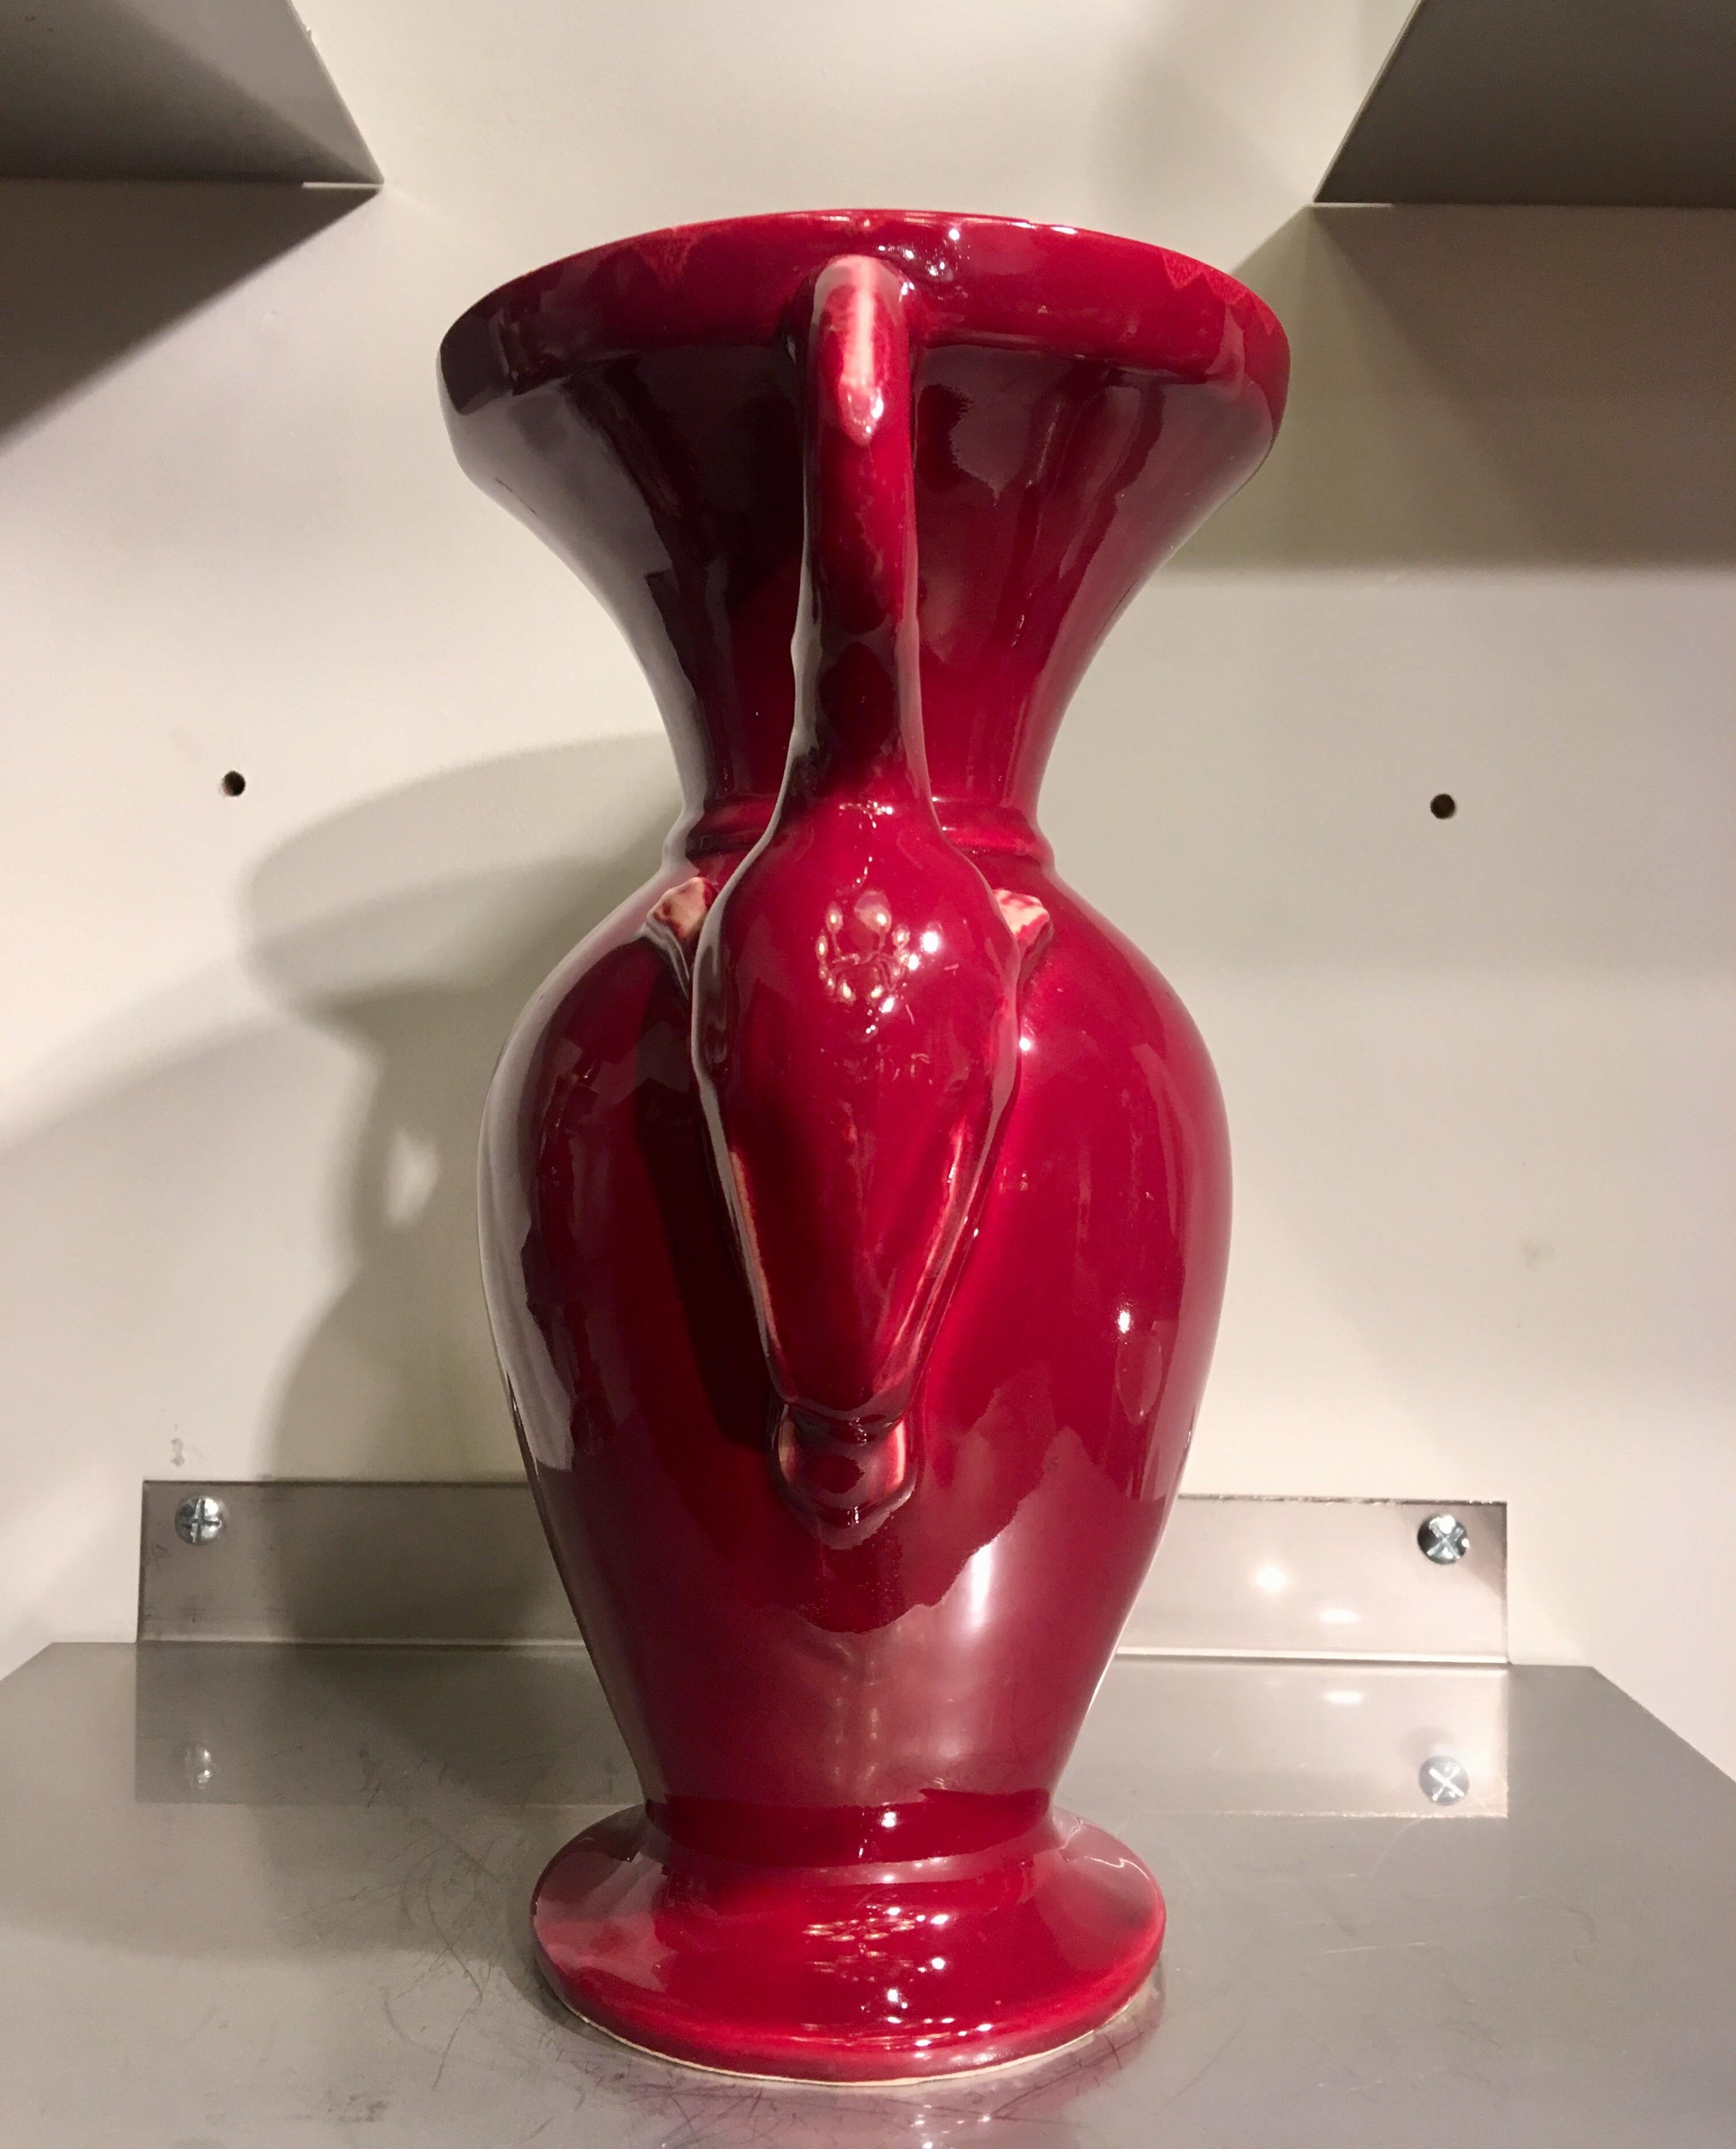 Ray Camart, Antibes, France, circa 1950.
Very decorative baluster vase in red ceramic with flamingos or egrets (birds) (waders).
Glazed earthenware.
A few tiny chips on the collar.
Signed and numbered under the base 